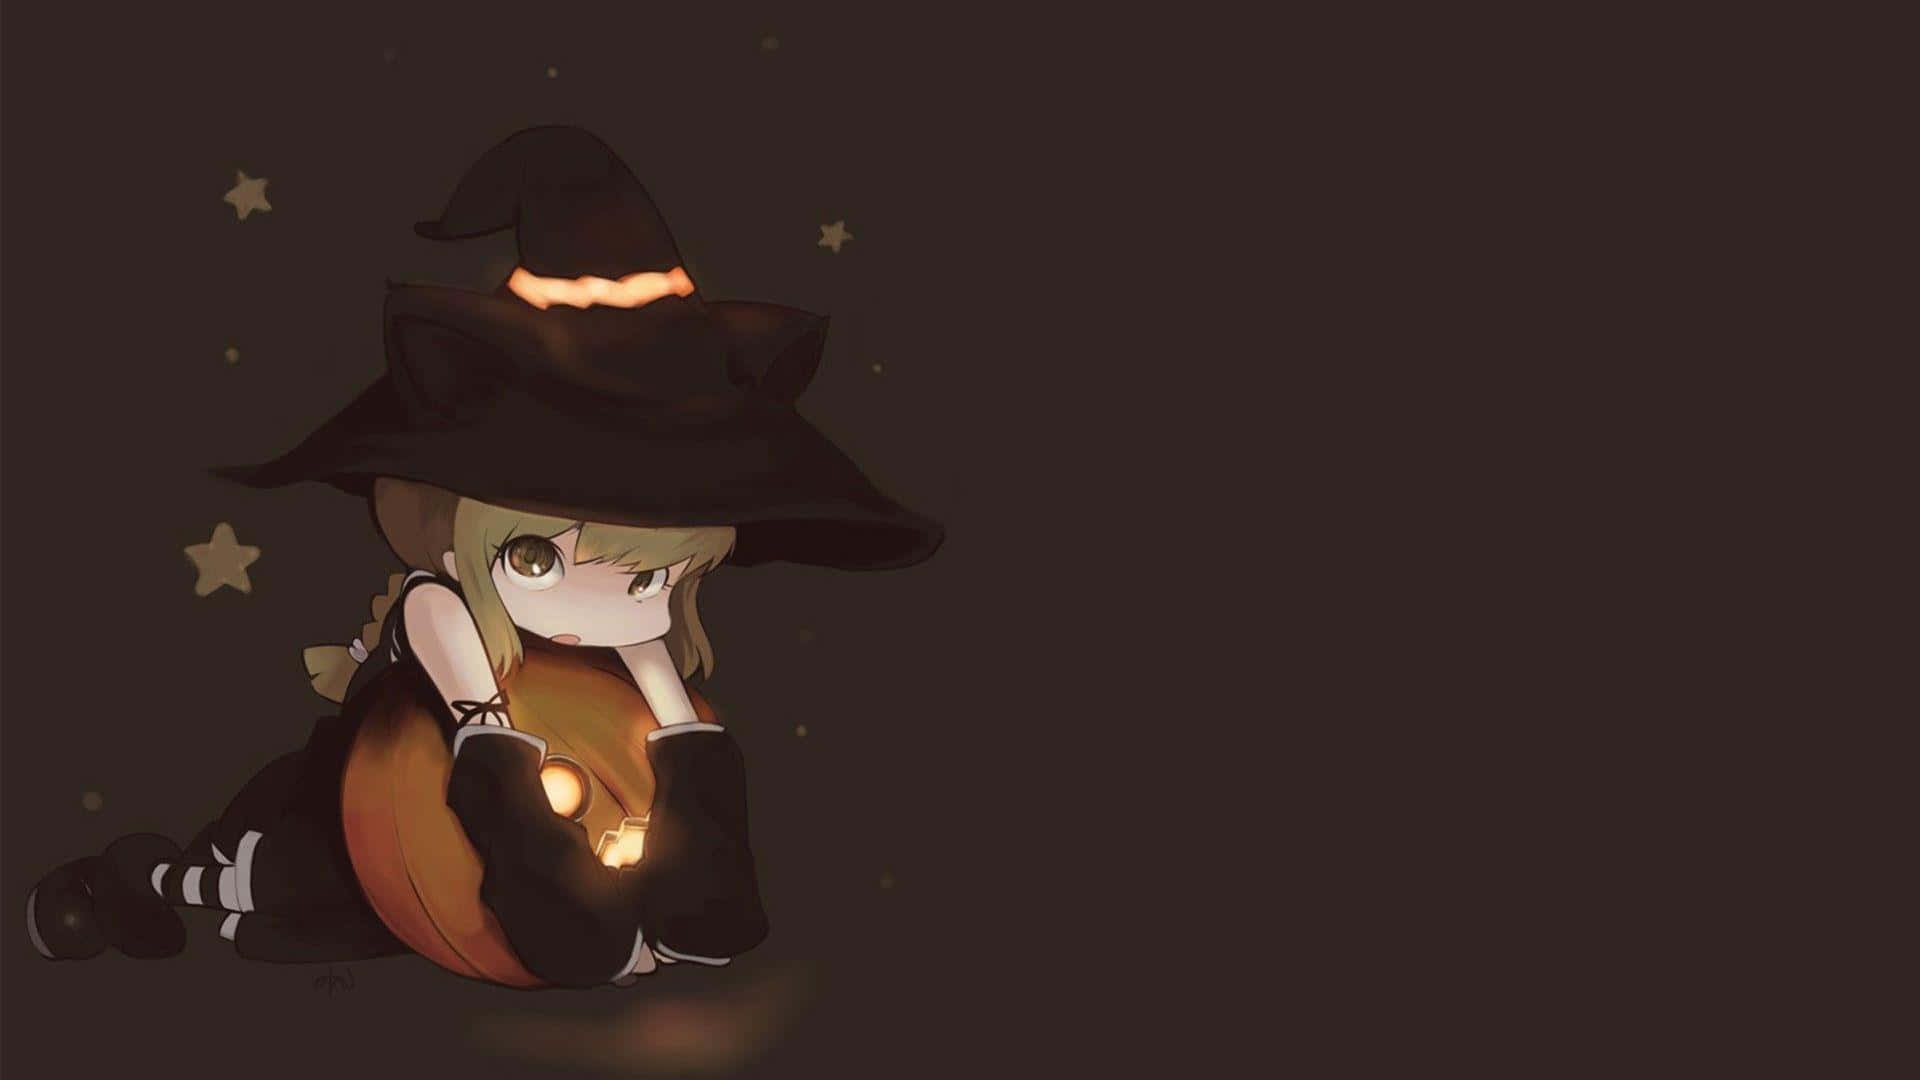 A vibrant collection of witch hats on display Wallpaper